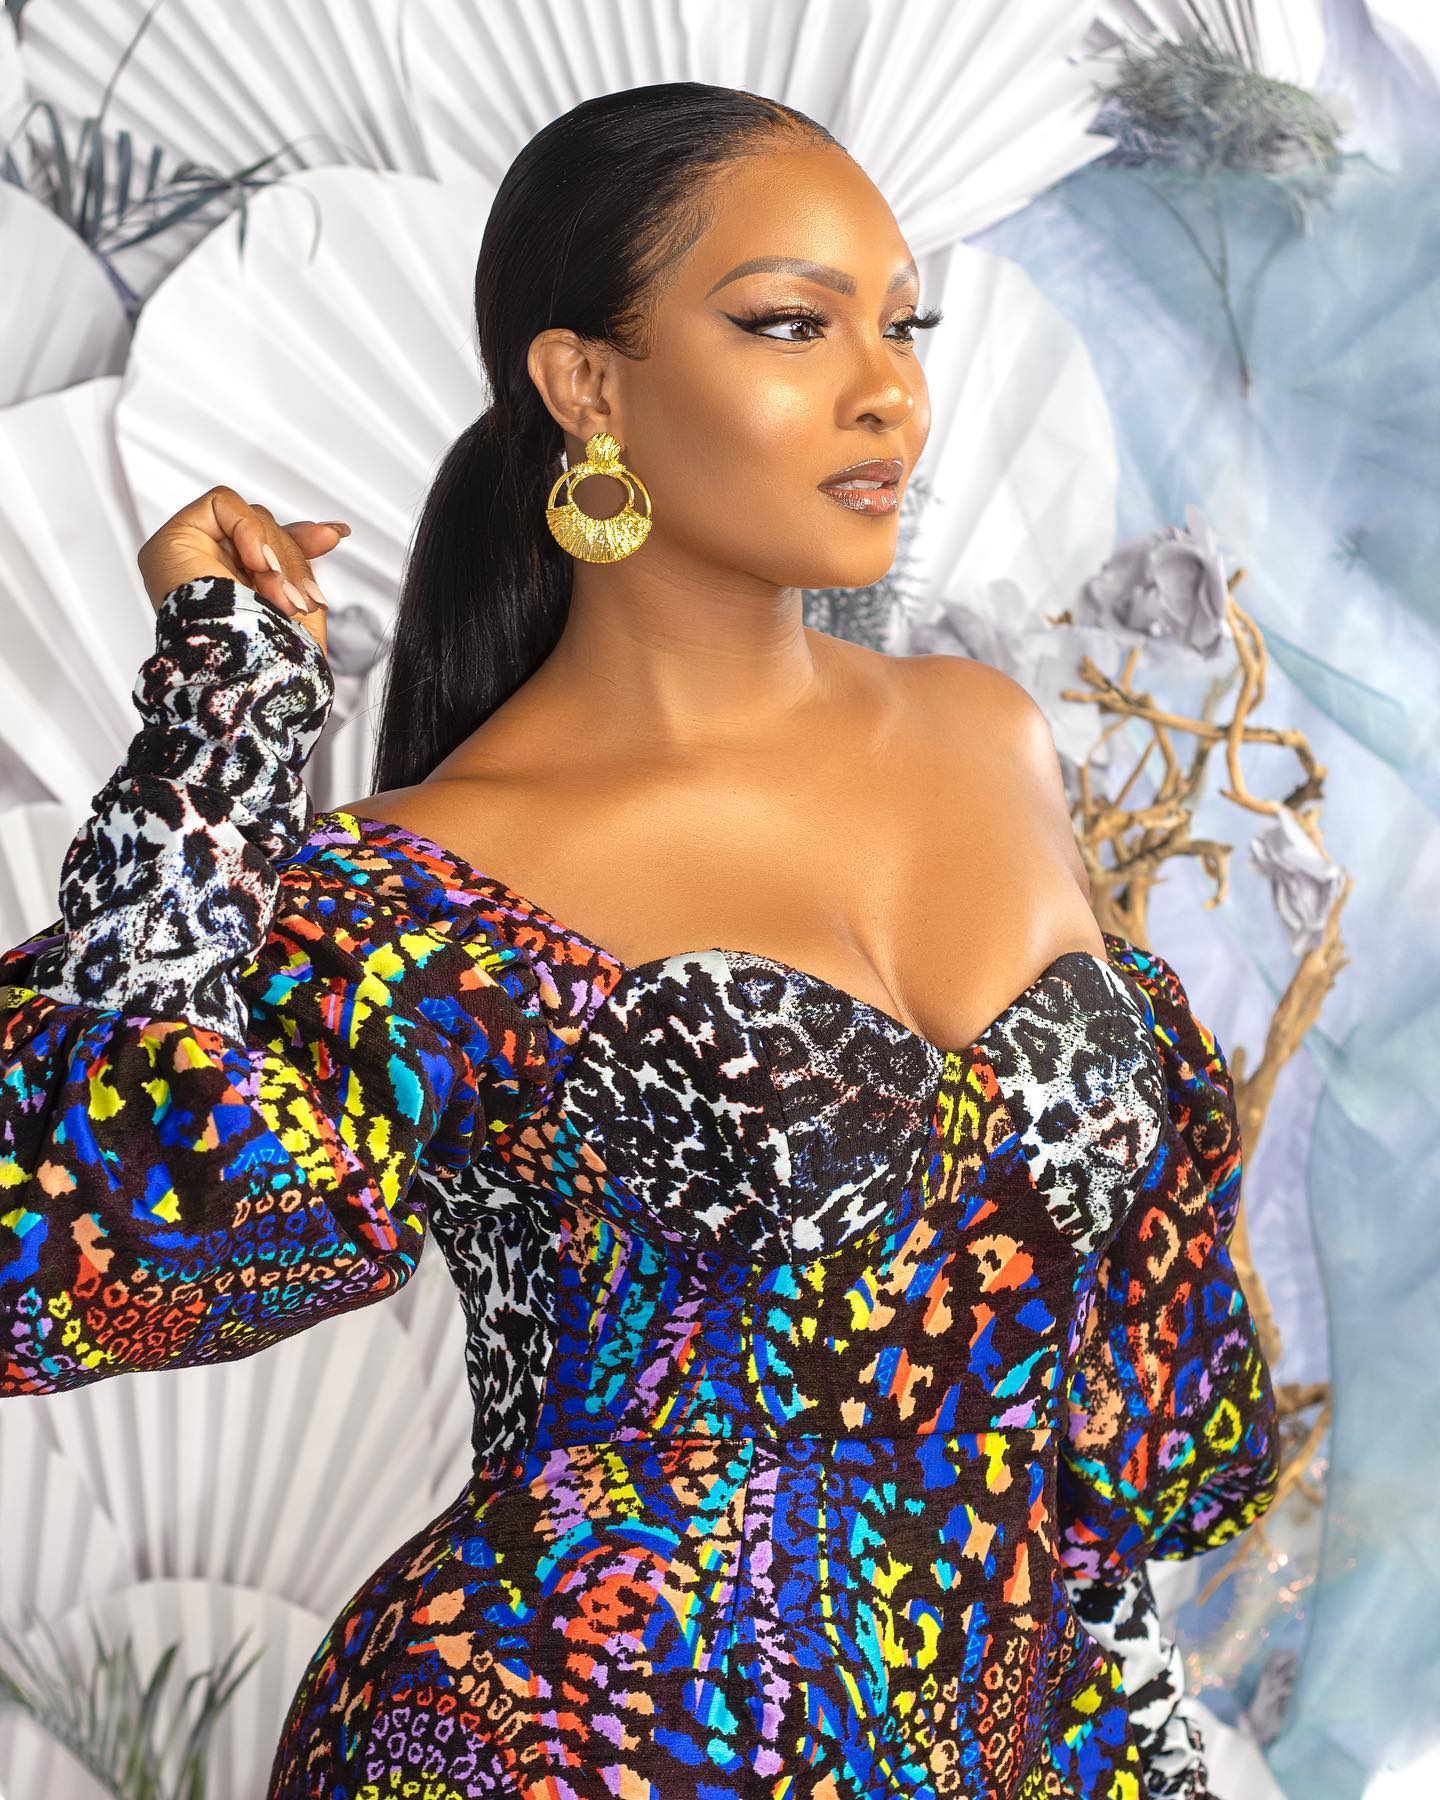 Osas Ighodaro's Biography, Age, Net Worth, Spouse, Education And Awards